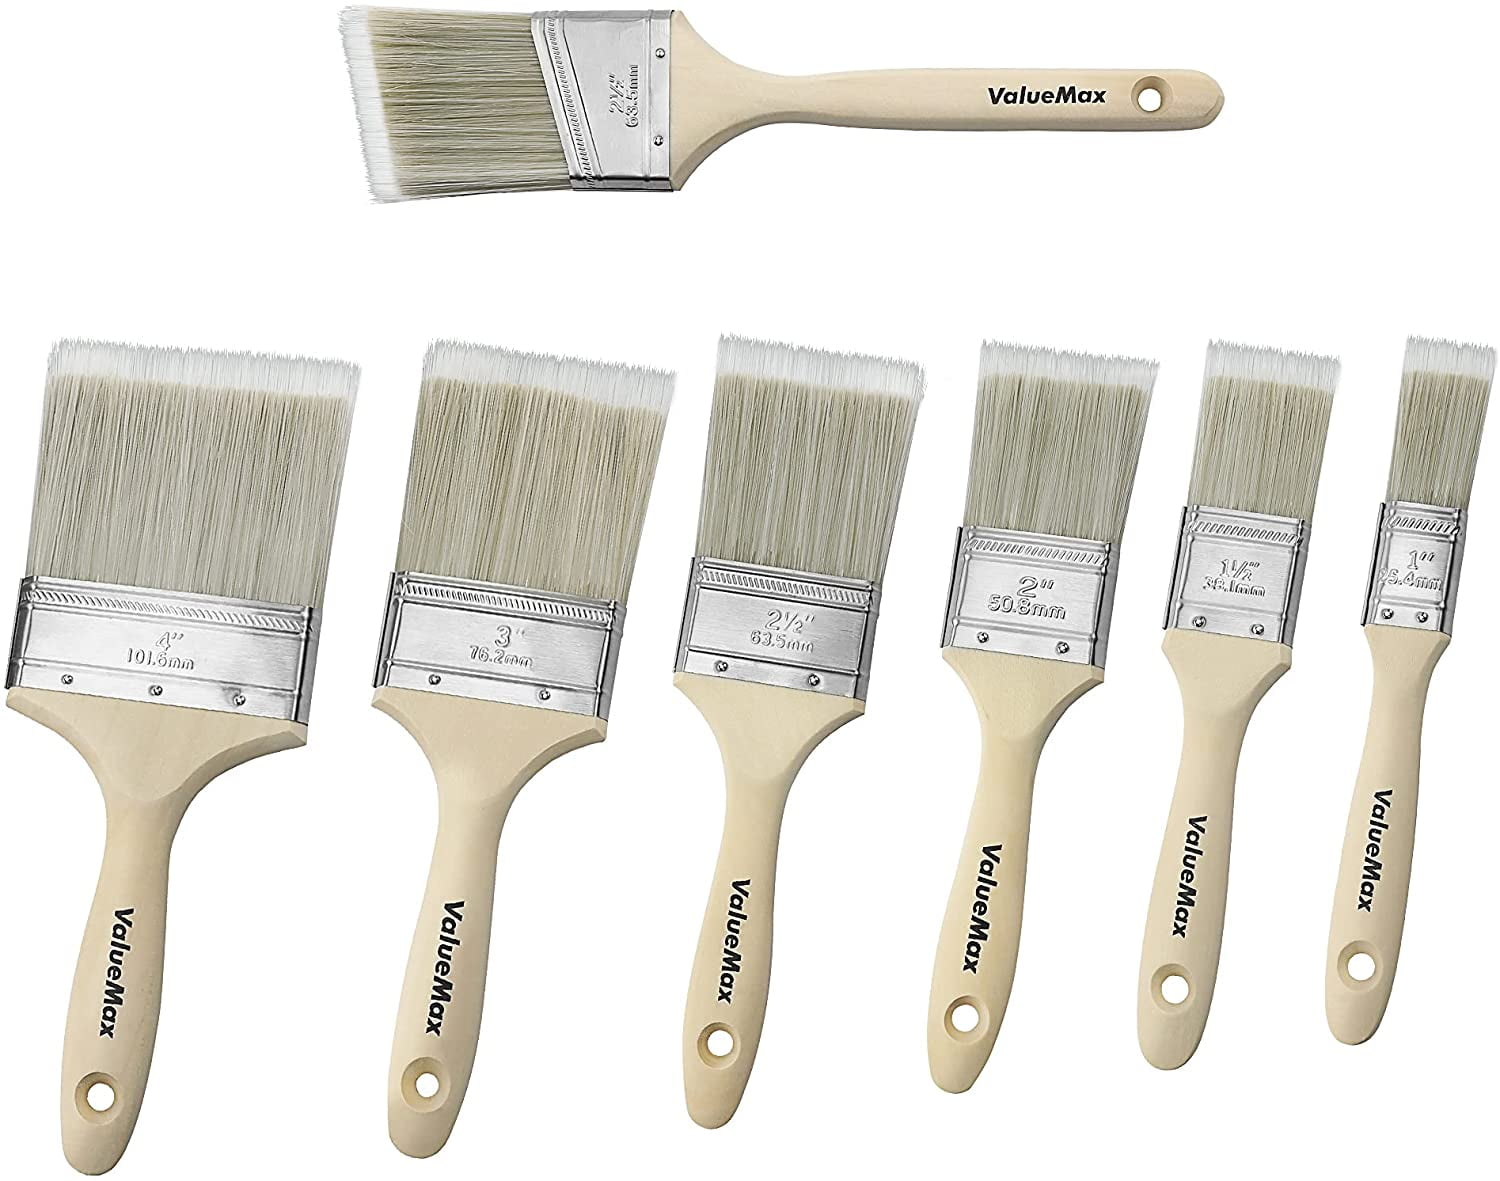 11 pcs Professional Oil & Acrylics Artist Brushes Pure Hog Bristles Lacquered Birchwood Long Handles with a Free Carrying Box Ltd